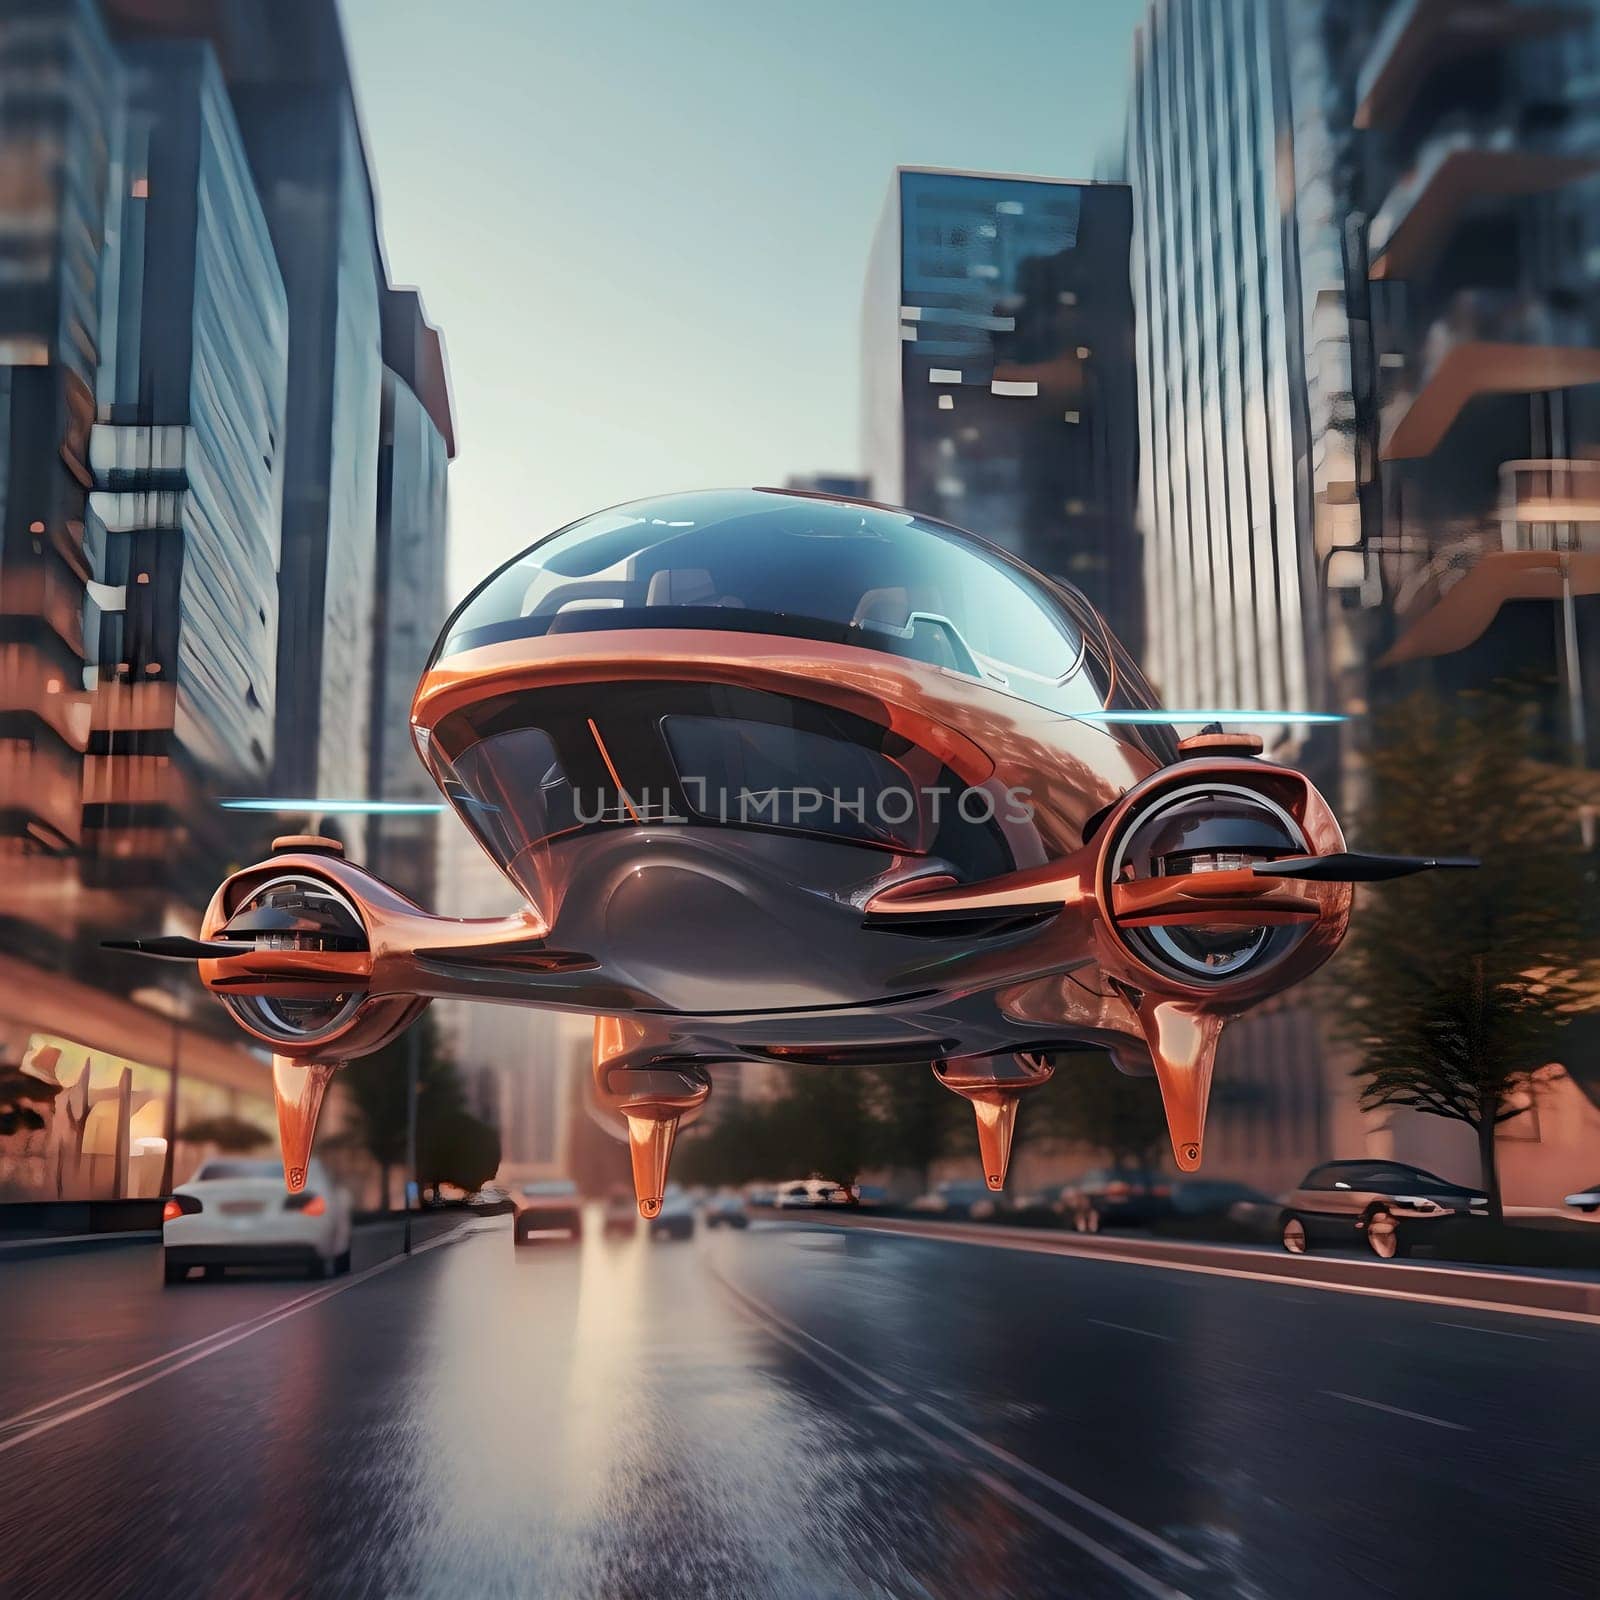 The flying car of the future flies in the city by cherezoff